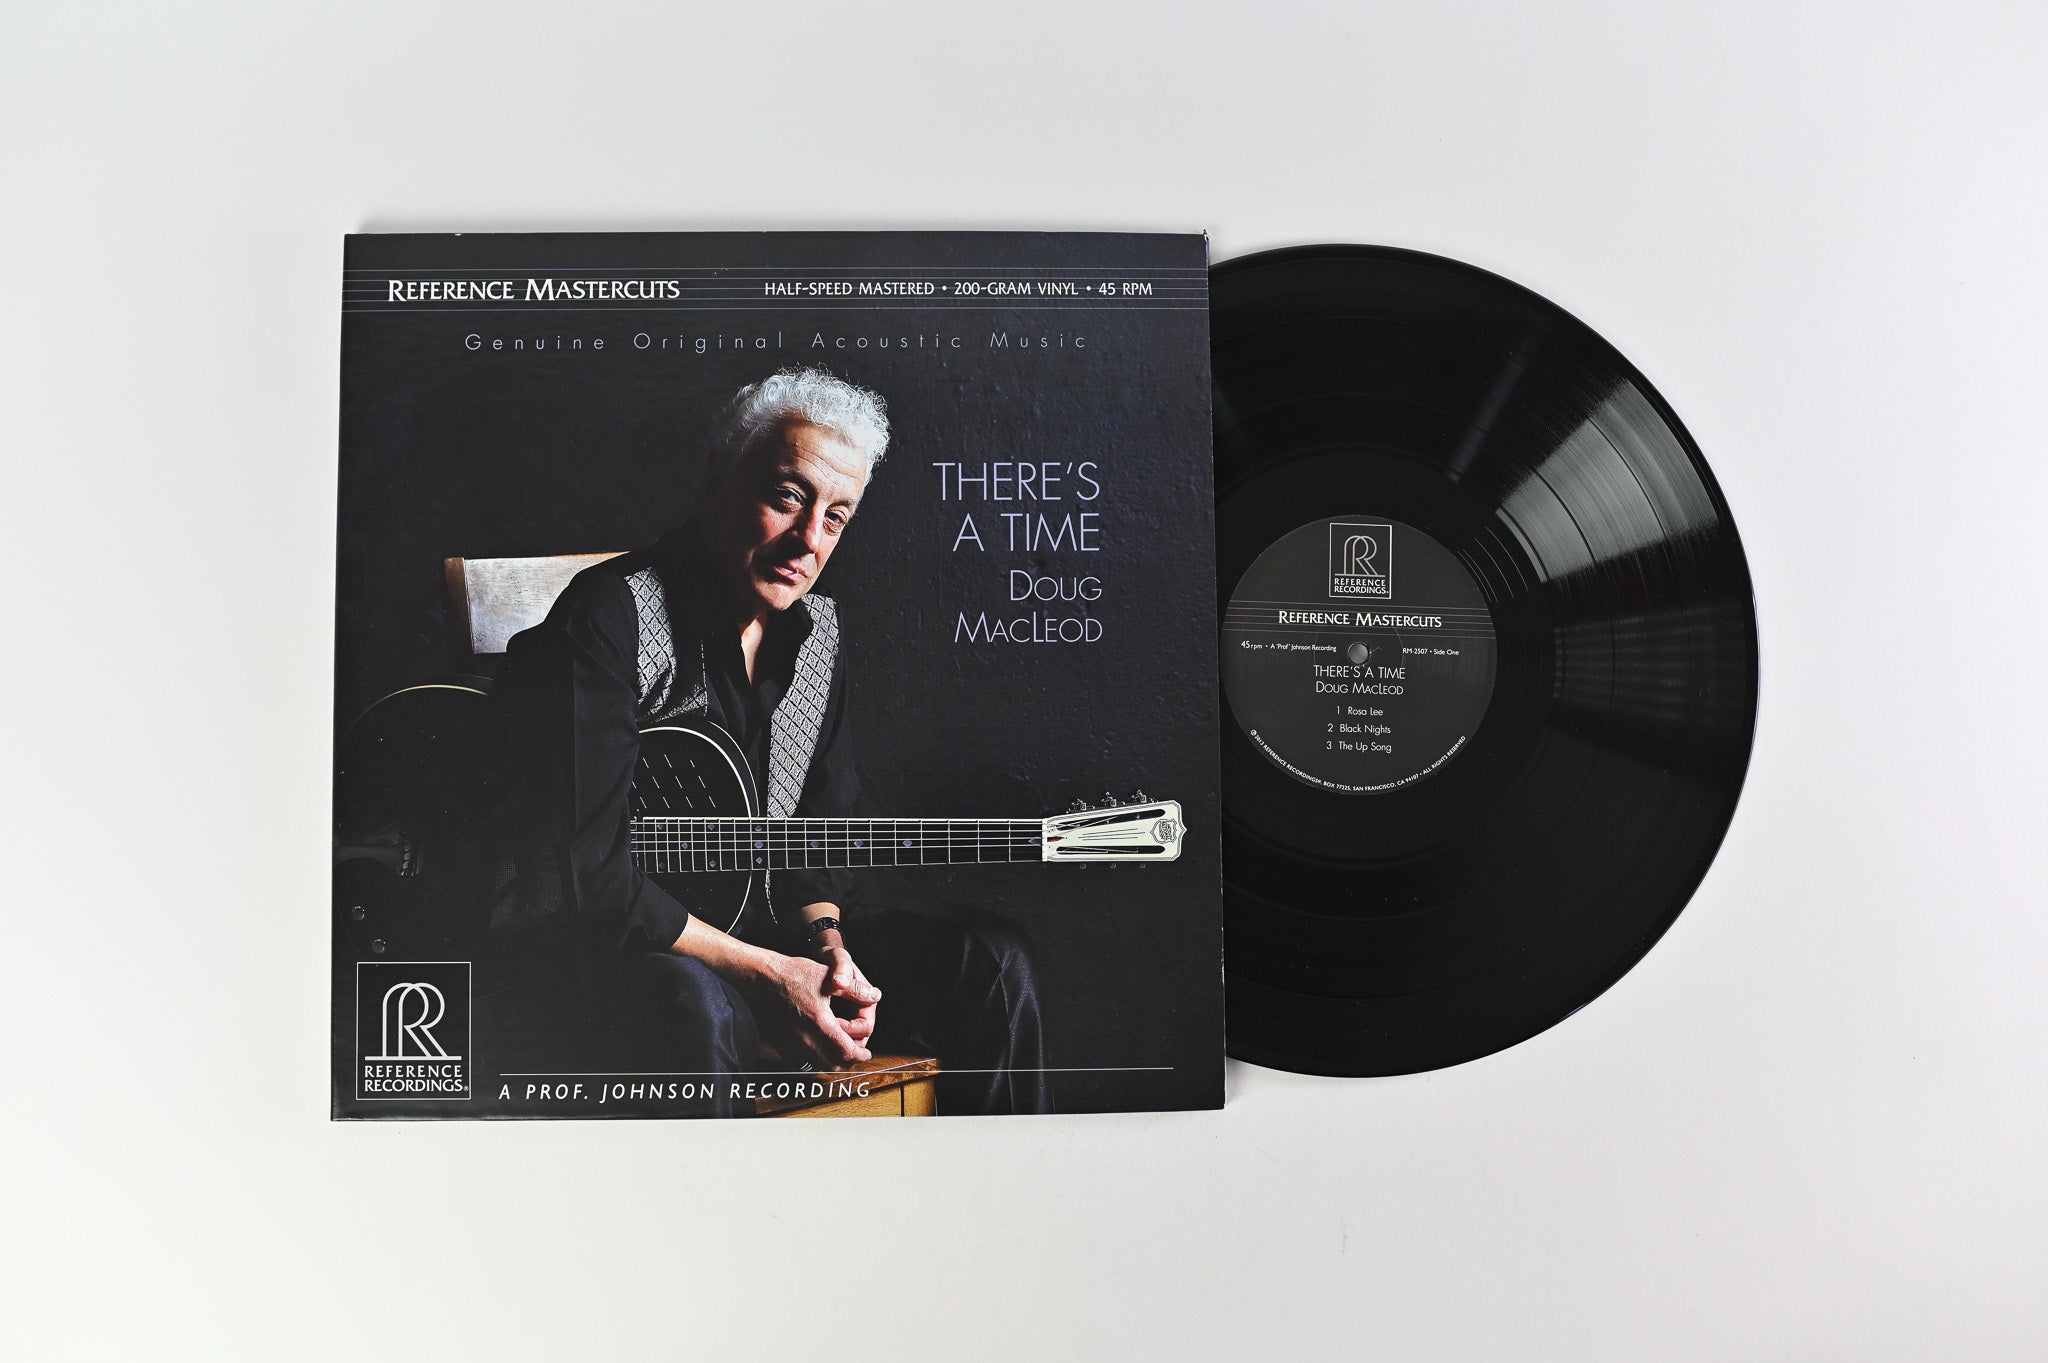 Doug MacLeod - There's A Time on Reference Recordings 45 RPM